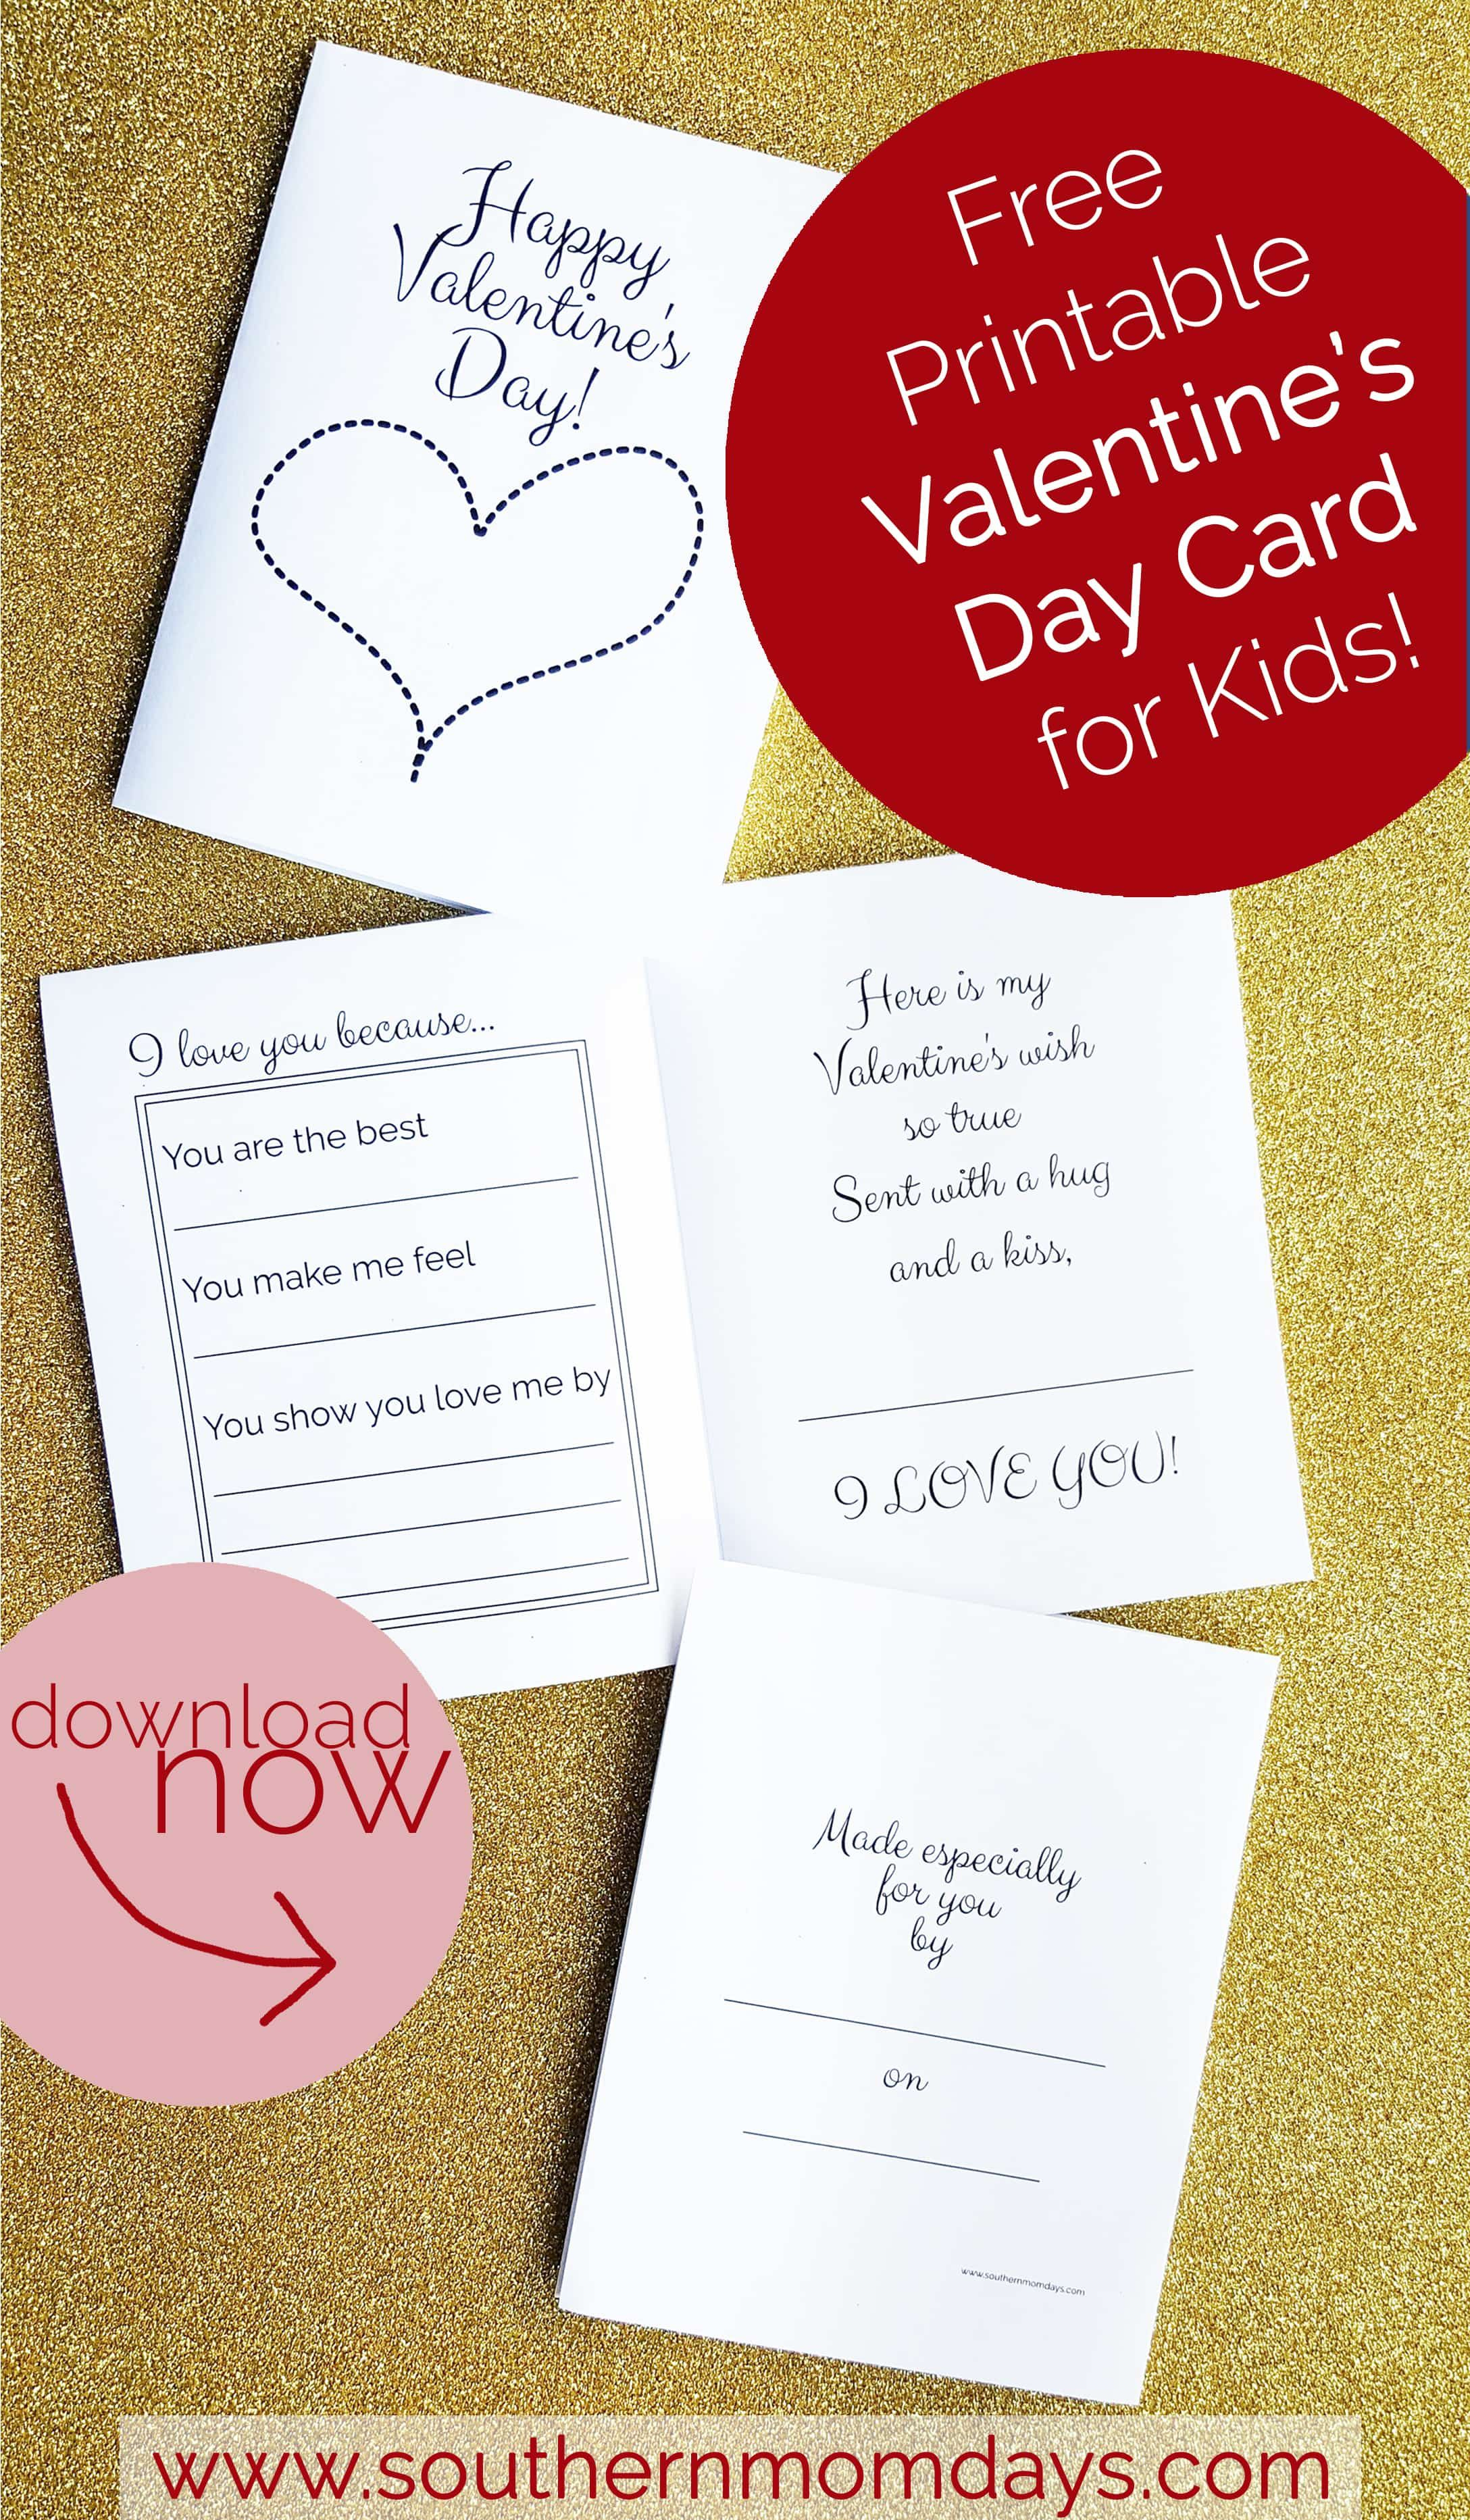 Free Printable Valentines Day Cards For Mom And Dad Free Printable